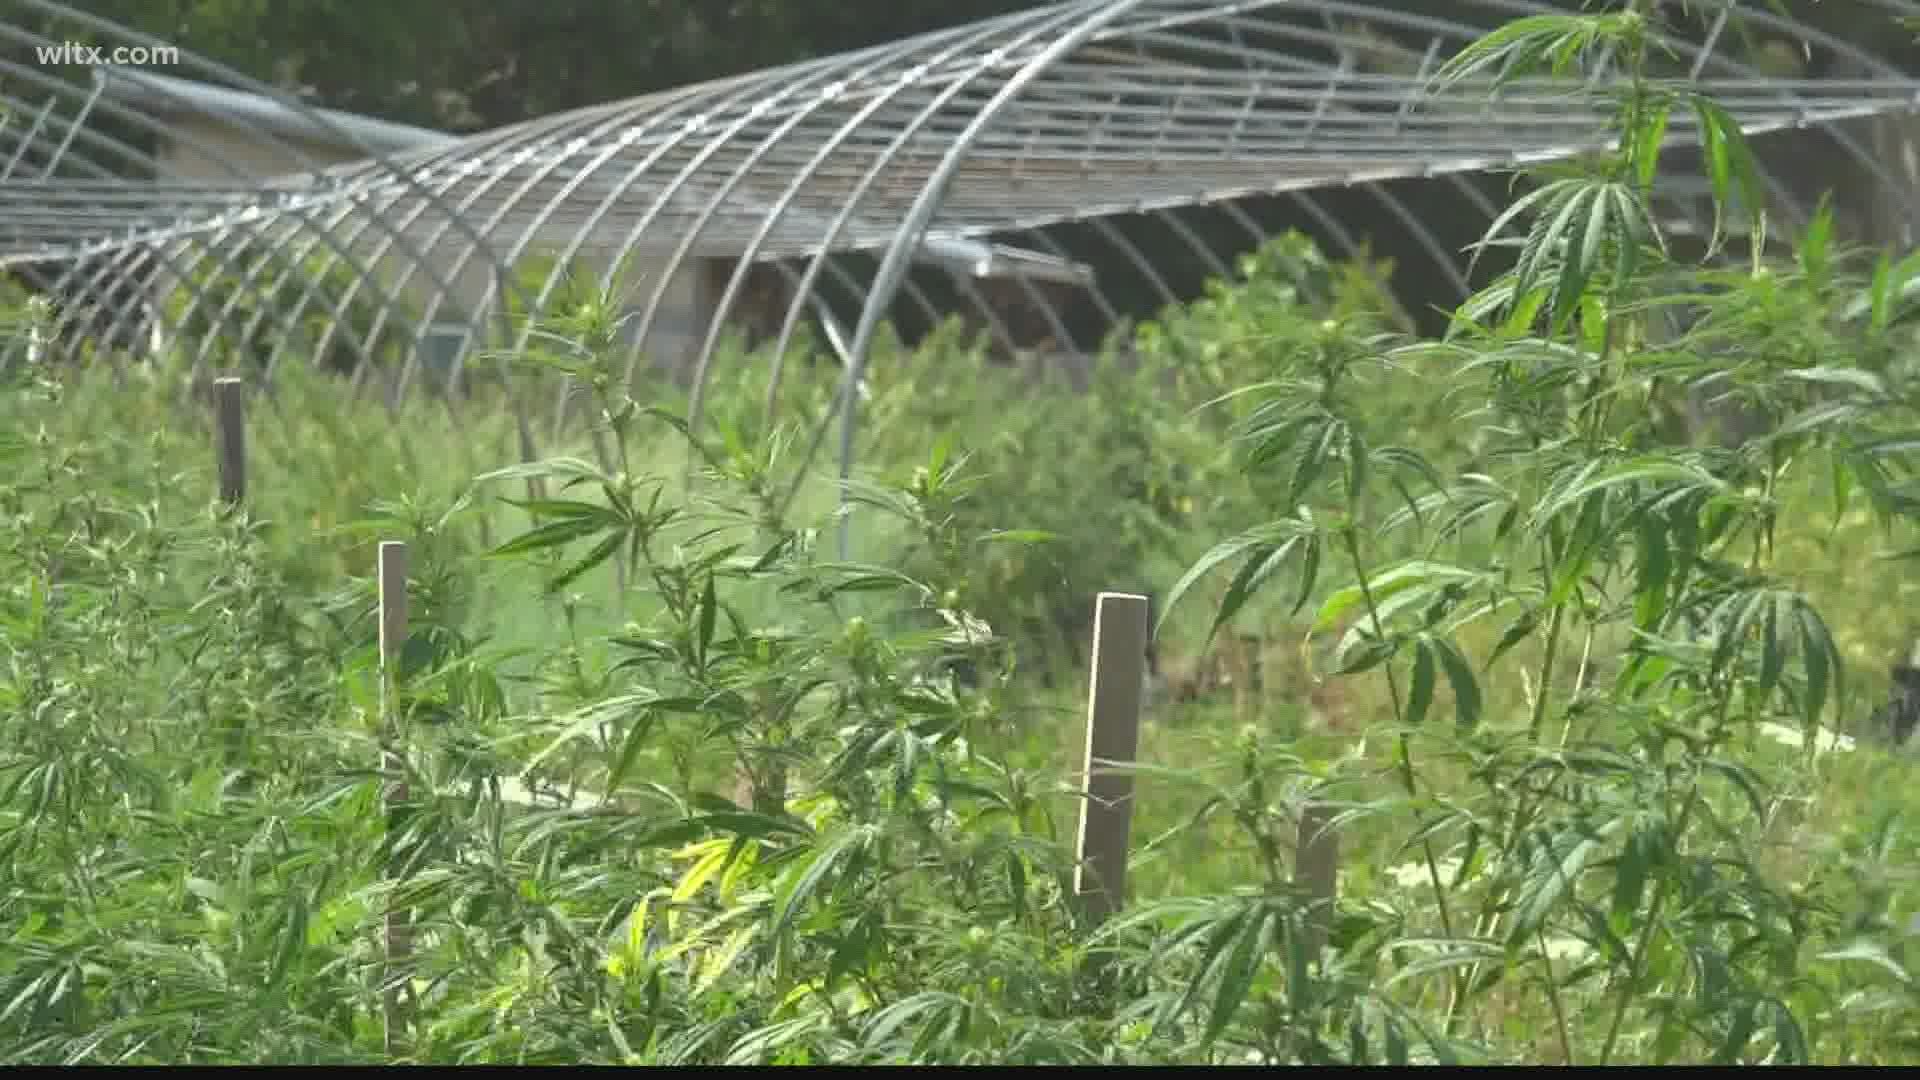 South Carolina farmers interested in growing hemp in 2021 can apply for a permit from Jan. 1 through Feb. 28, 2021.